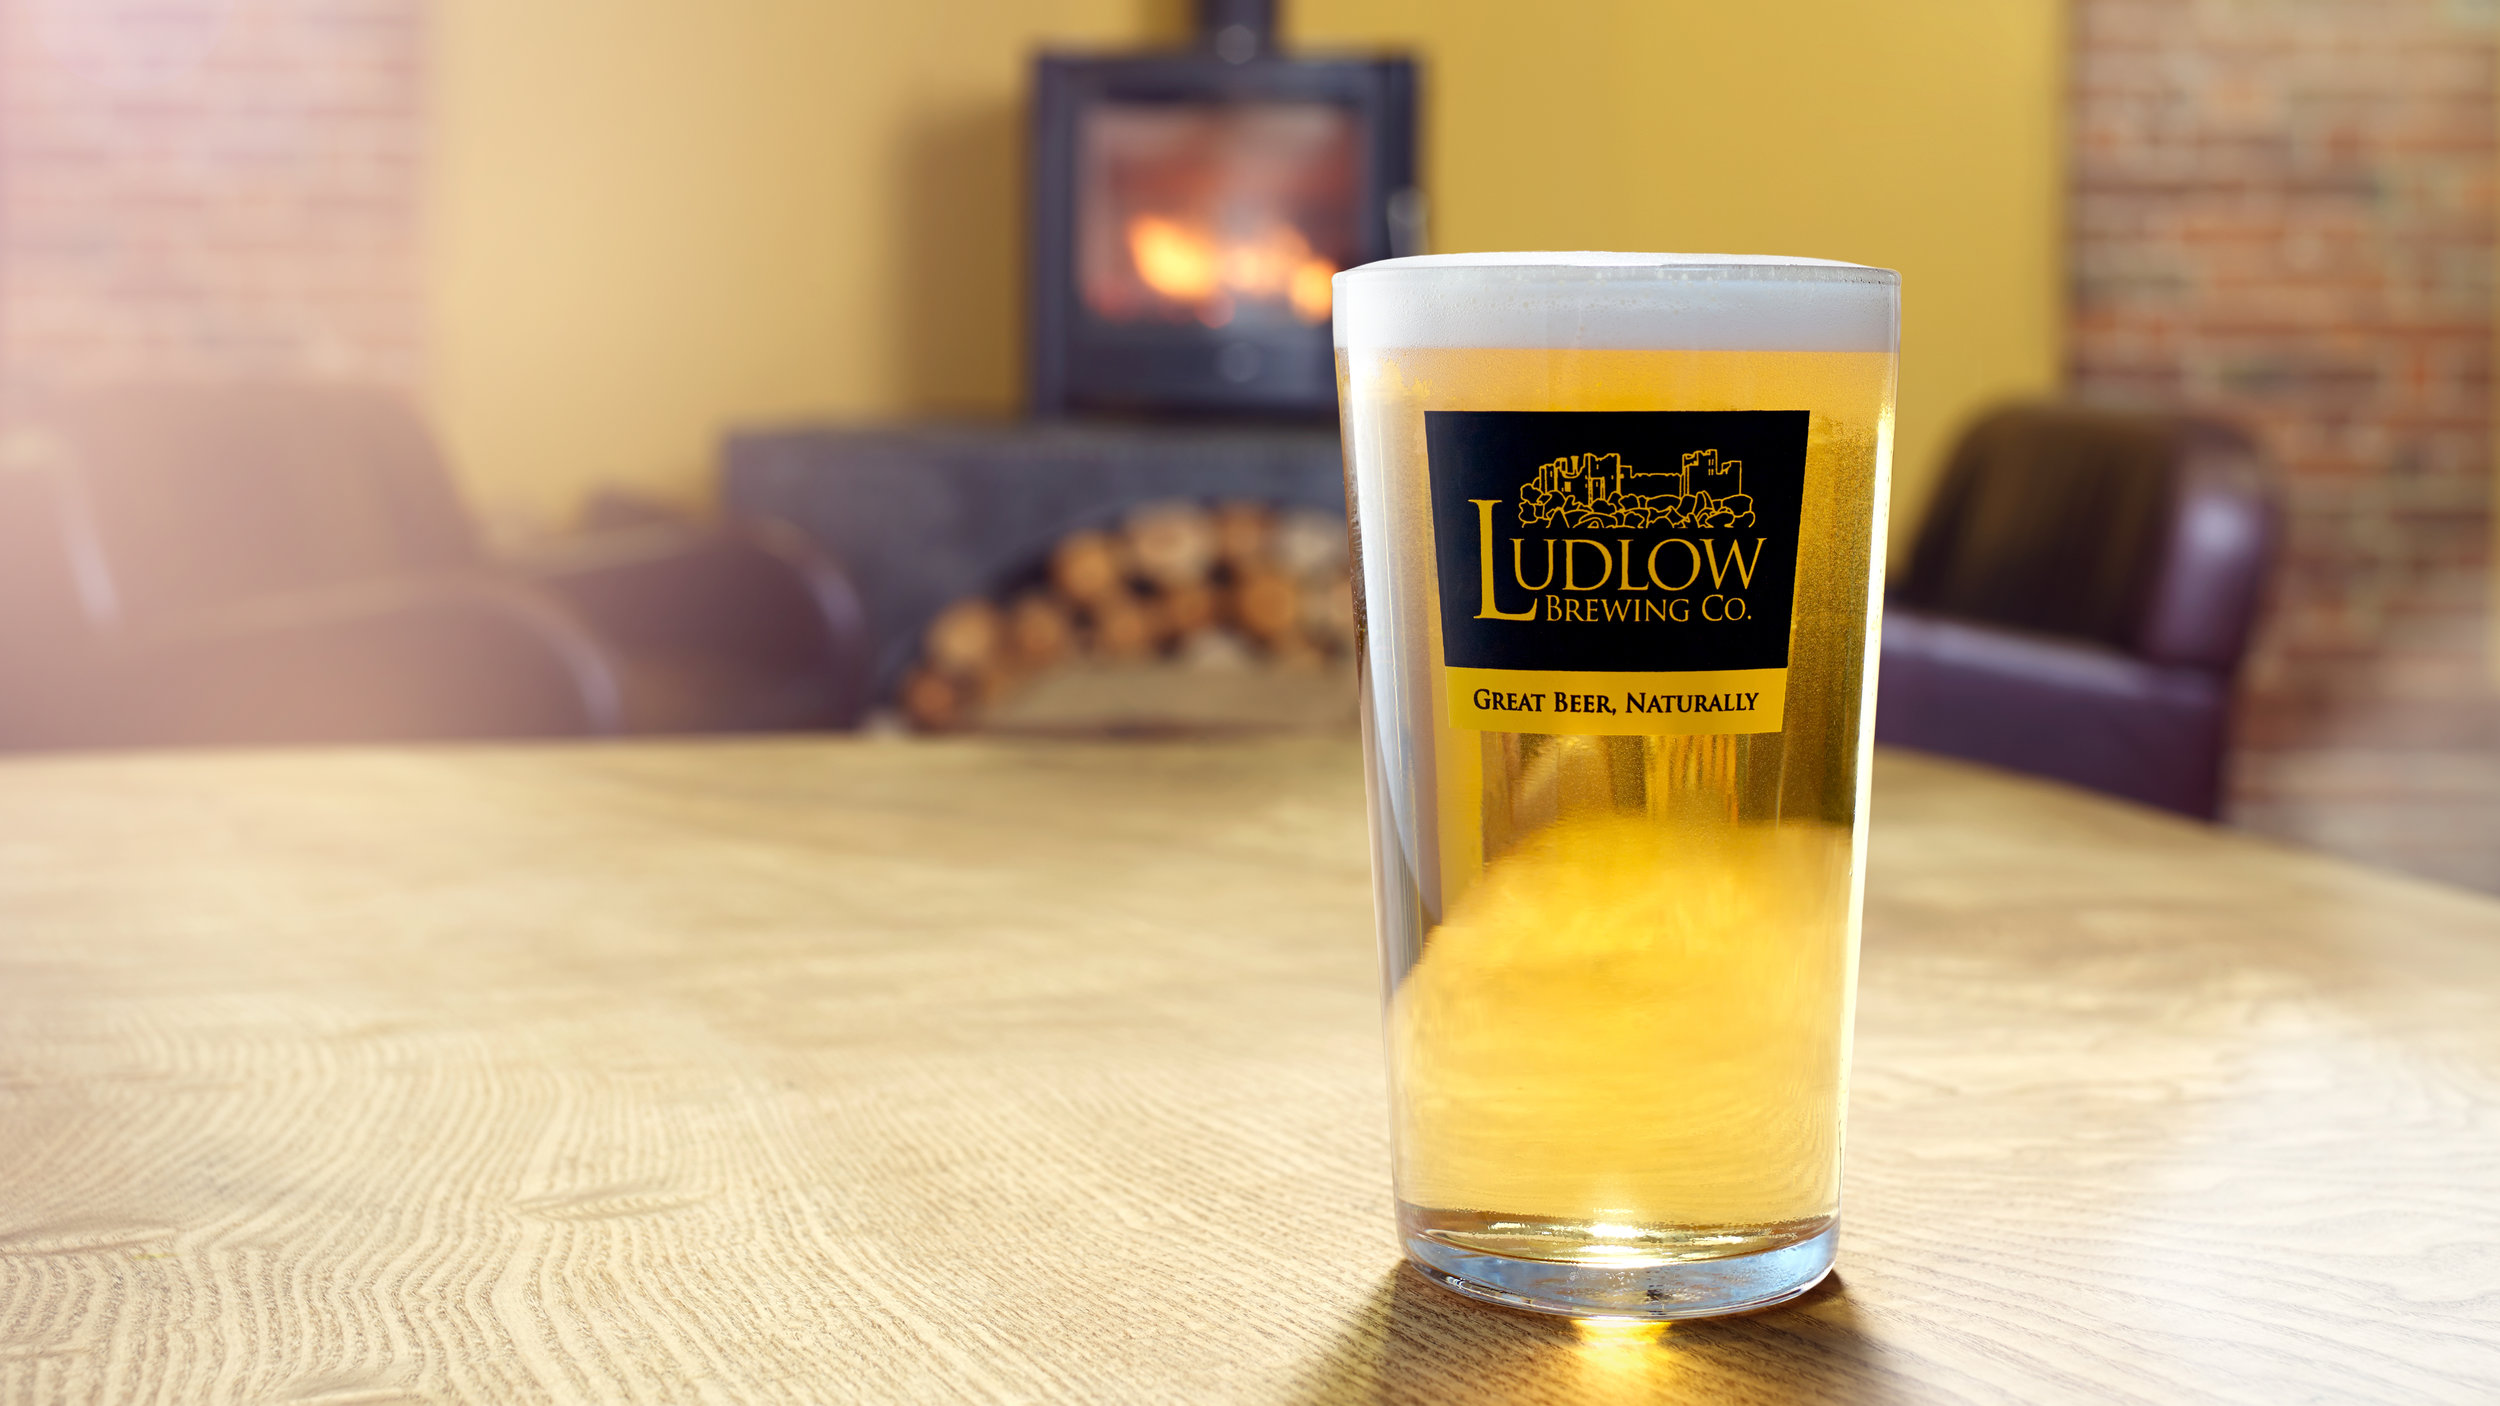 THE BLONDE:&nbsp;PINT OF AWARD-WINNING LUDLOW GOLD SOURCE: the brewery